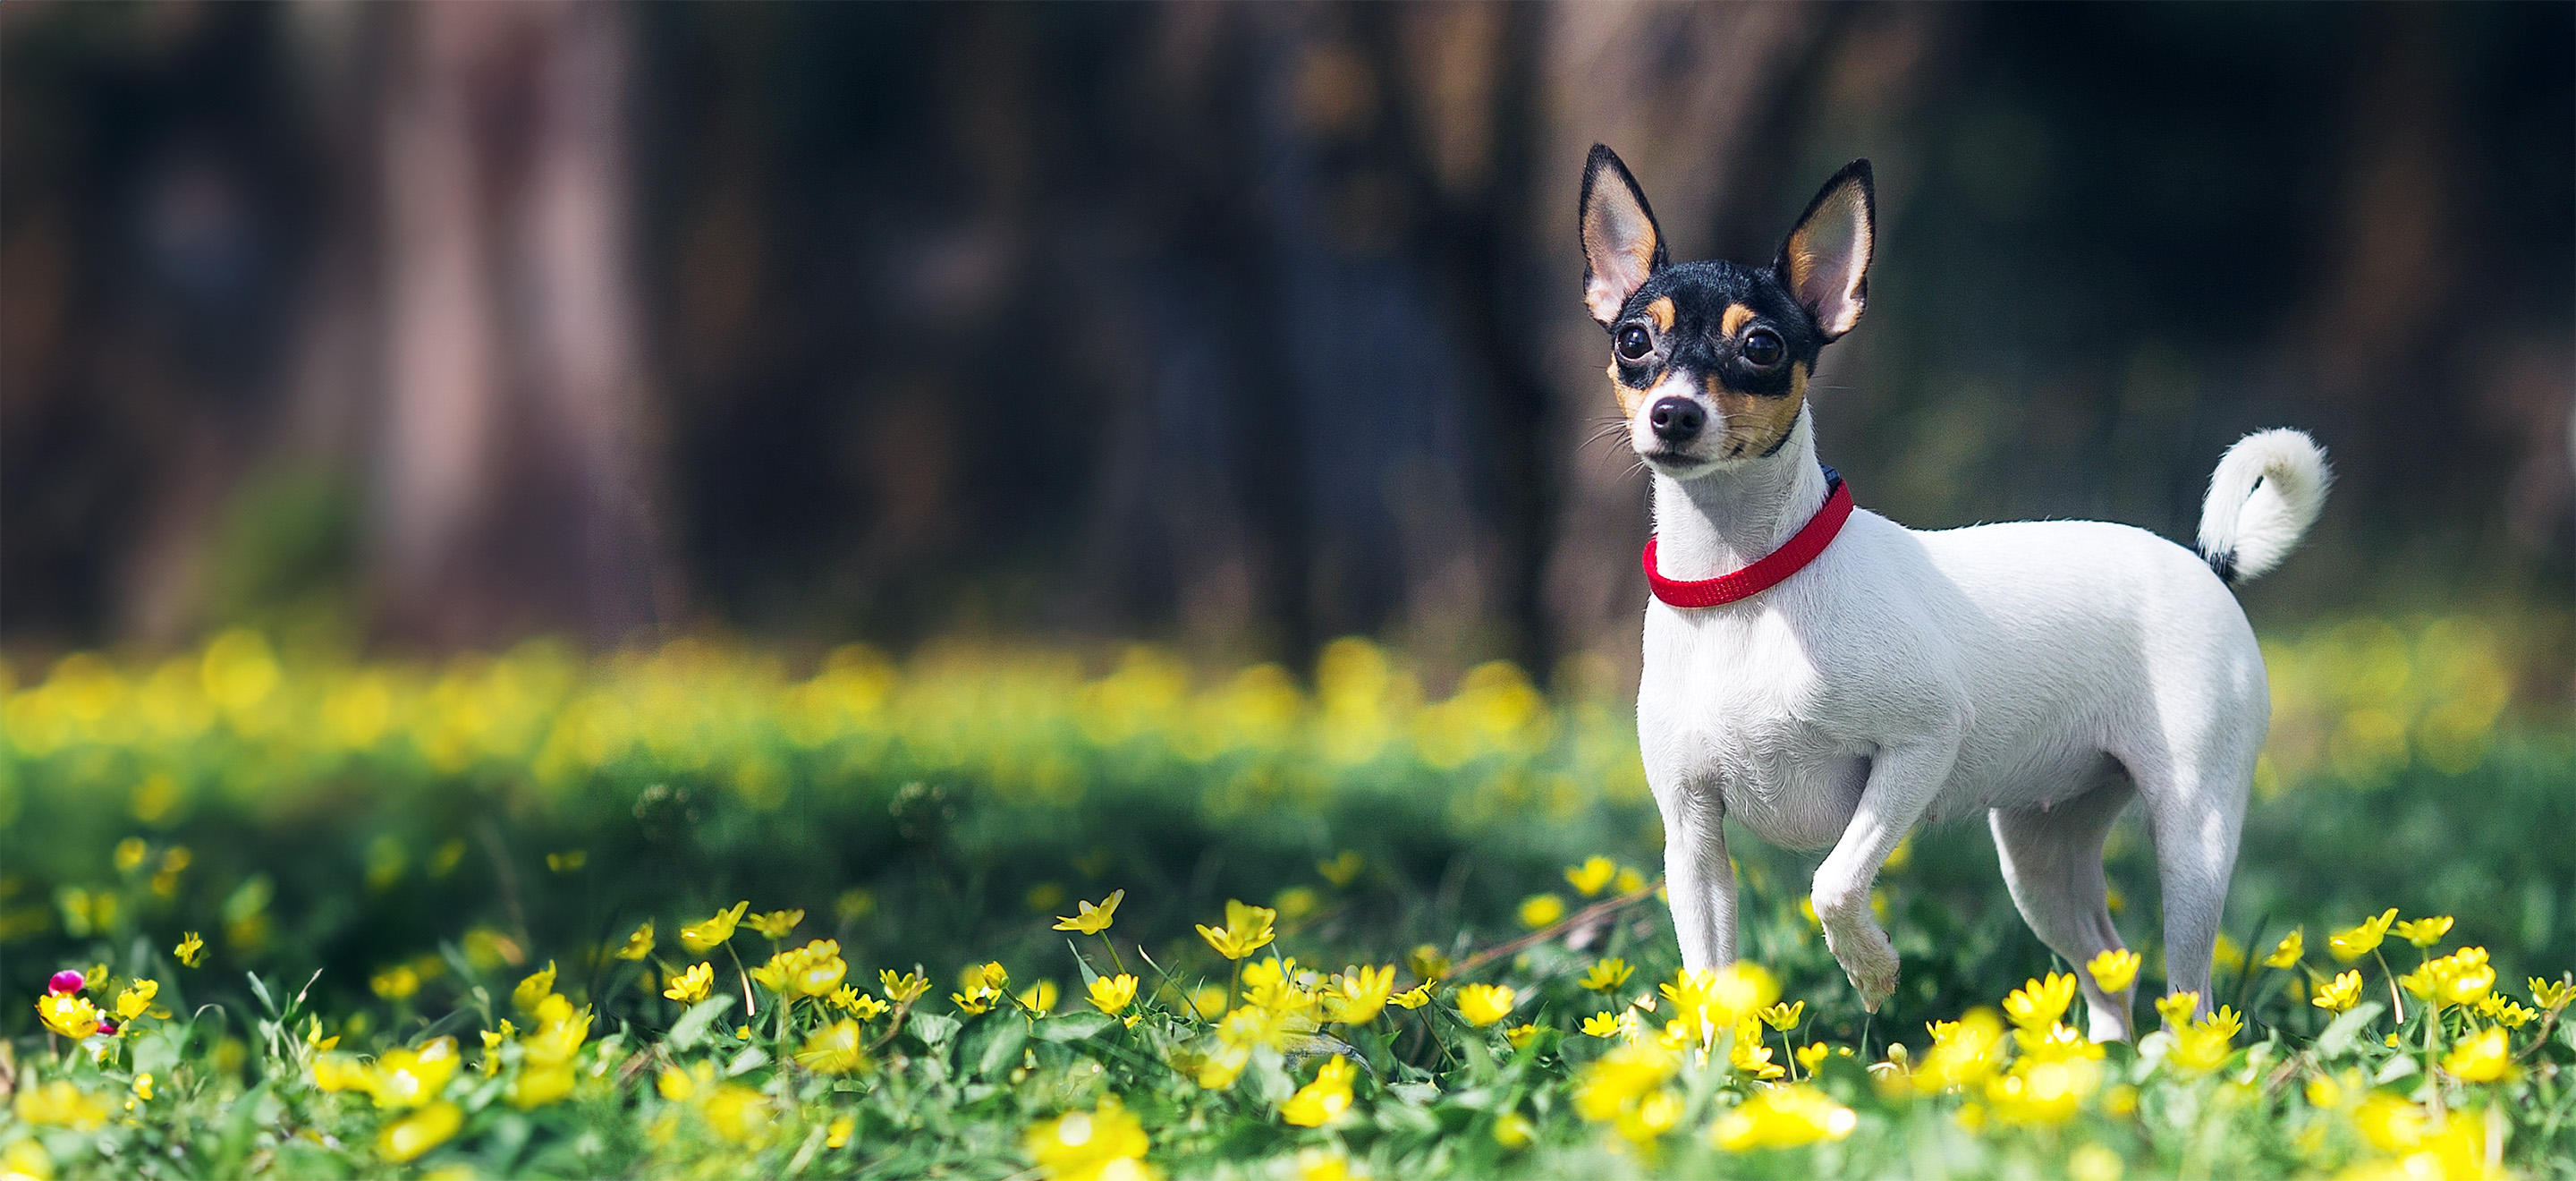 Toy fox terrier puppy standing in a field of flowers image